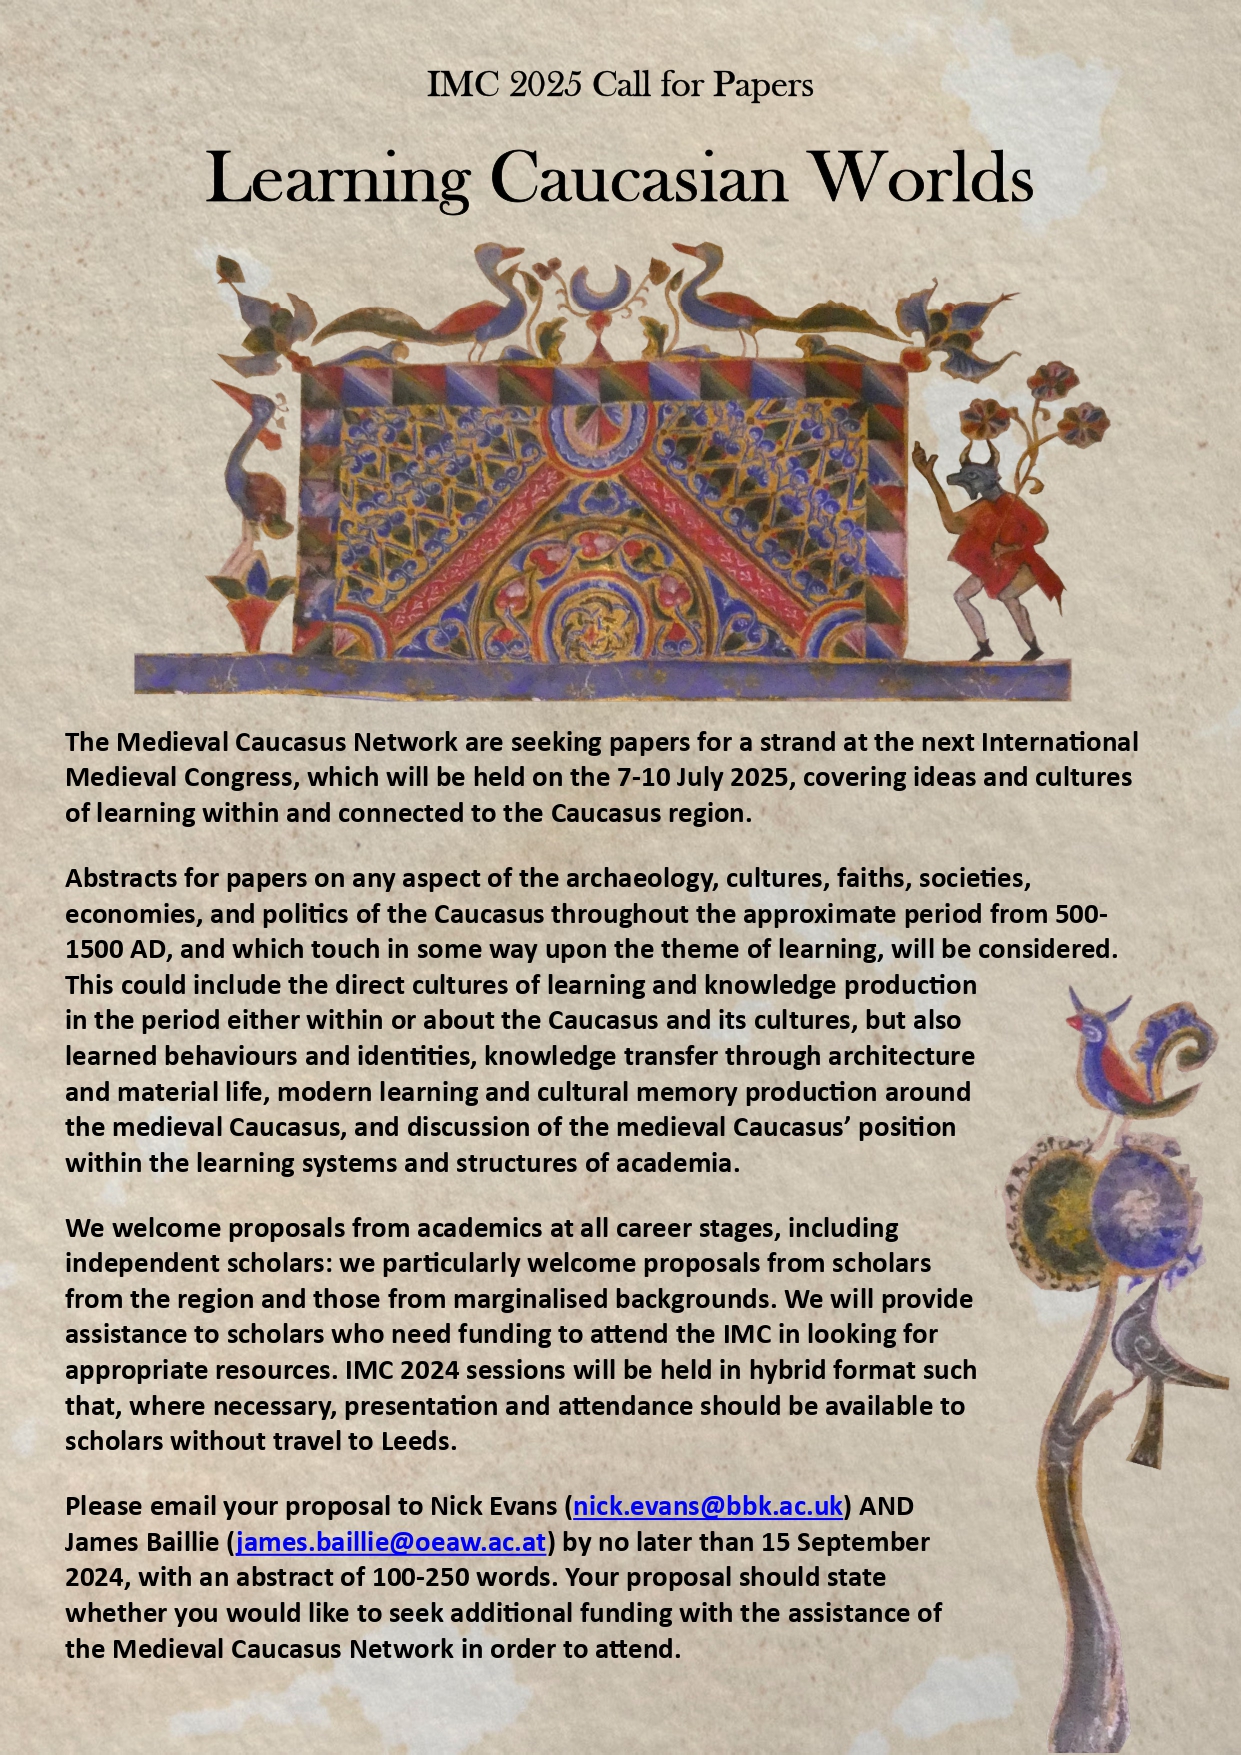 Call for Papers: Learning Caucasian Worlds (IMC Leeds 2025)